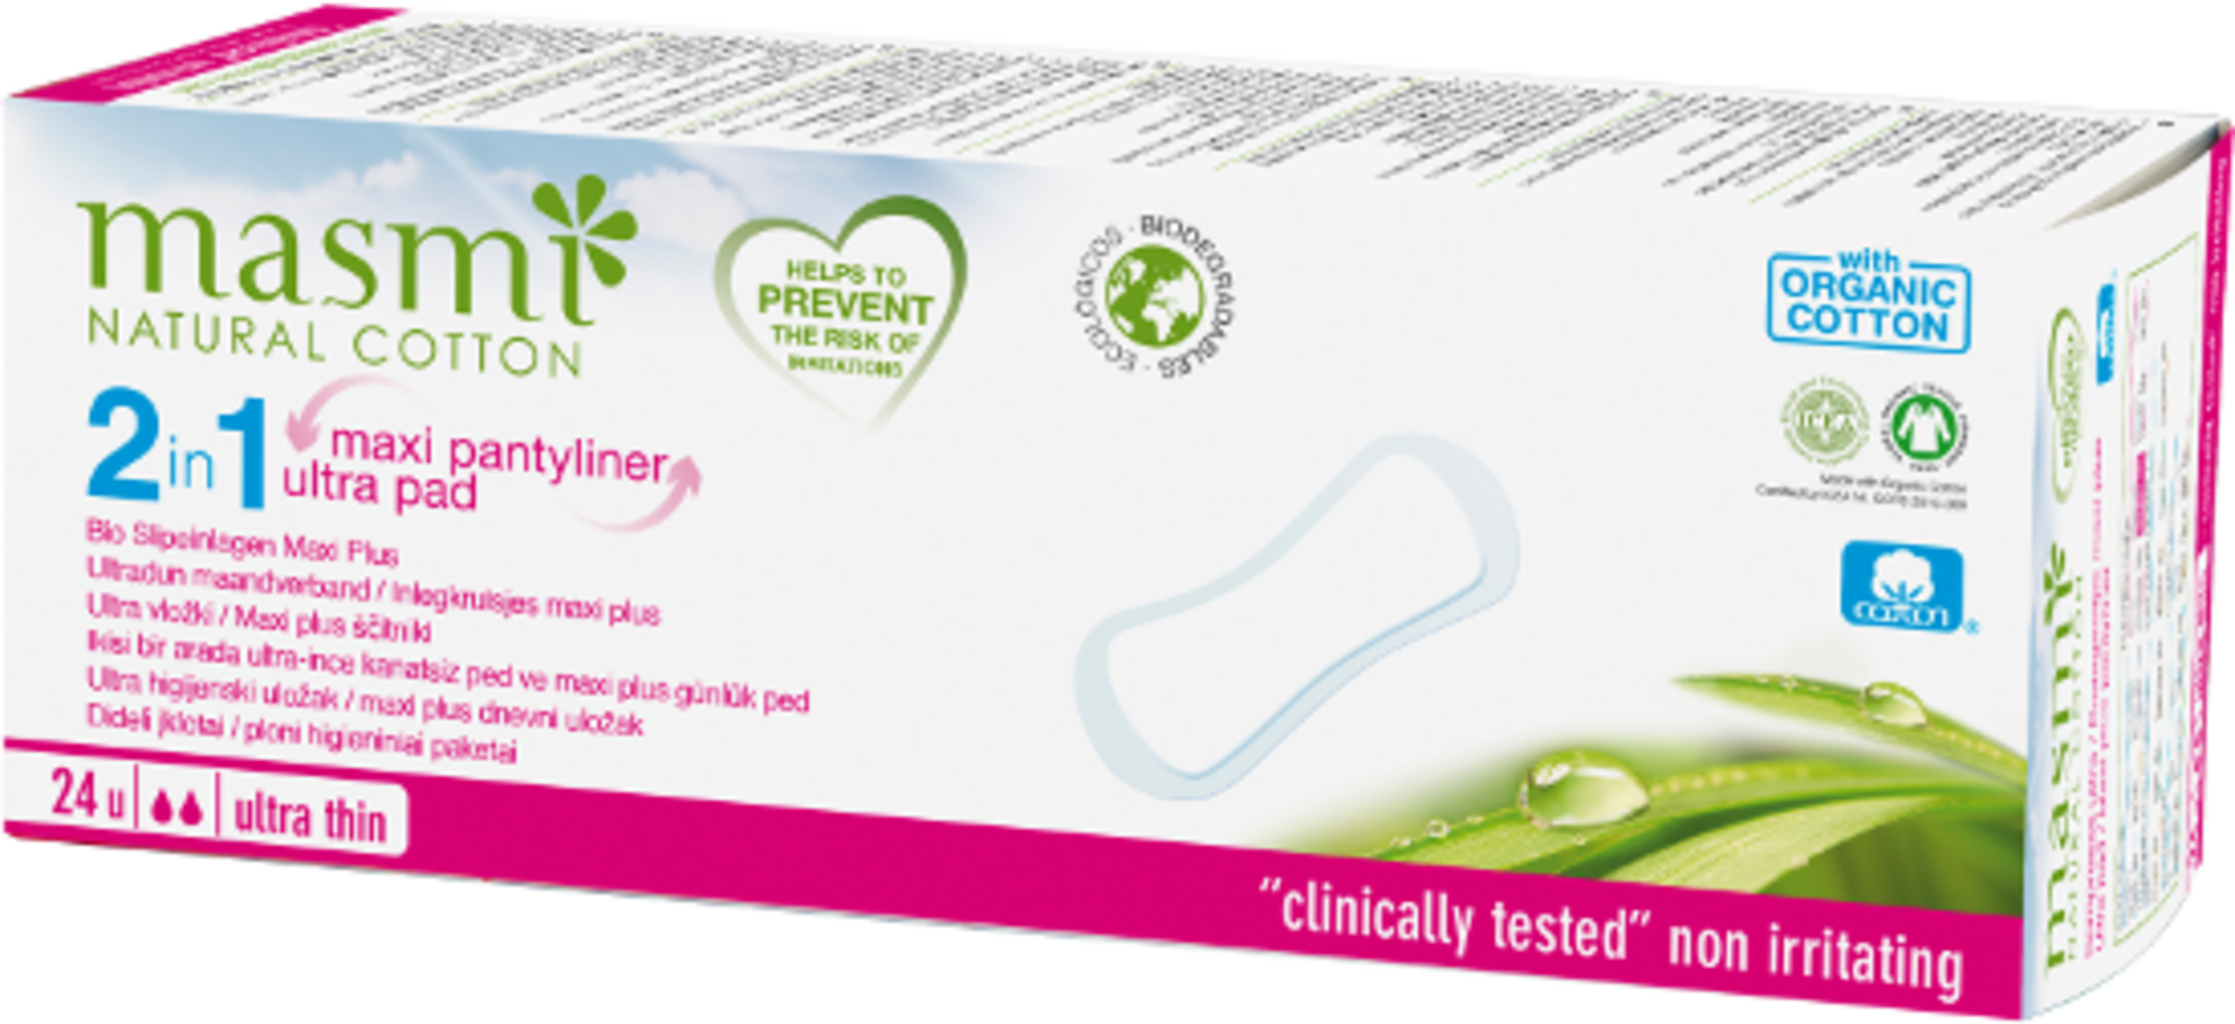 Re:Pad Blue Organic Cotton Panty Liners Super Pack